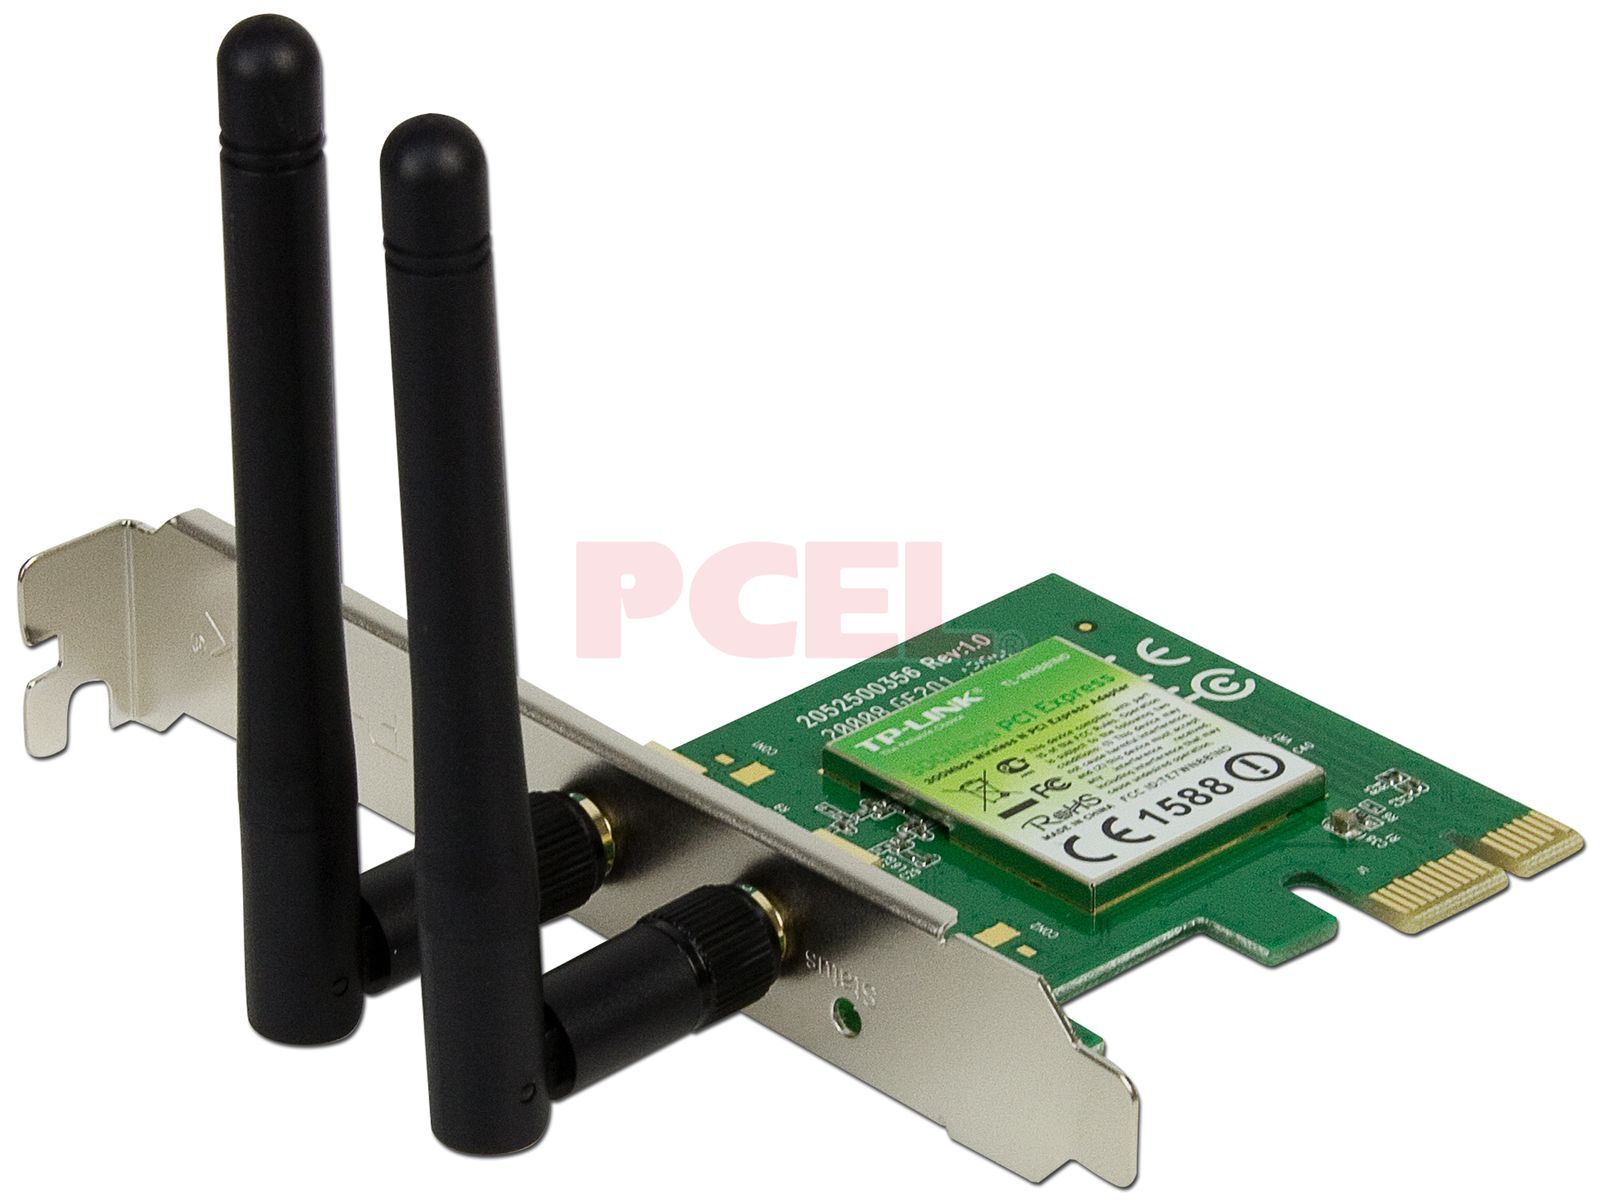 Continuo Comparable ocio Tarjeta de Red Inalámbrica con 2 Antenas TP-Link, Wireless N (Wi-Fi 4),  hasta 300Mbps, PCI Express.